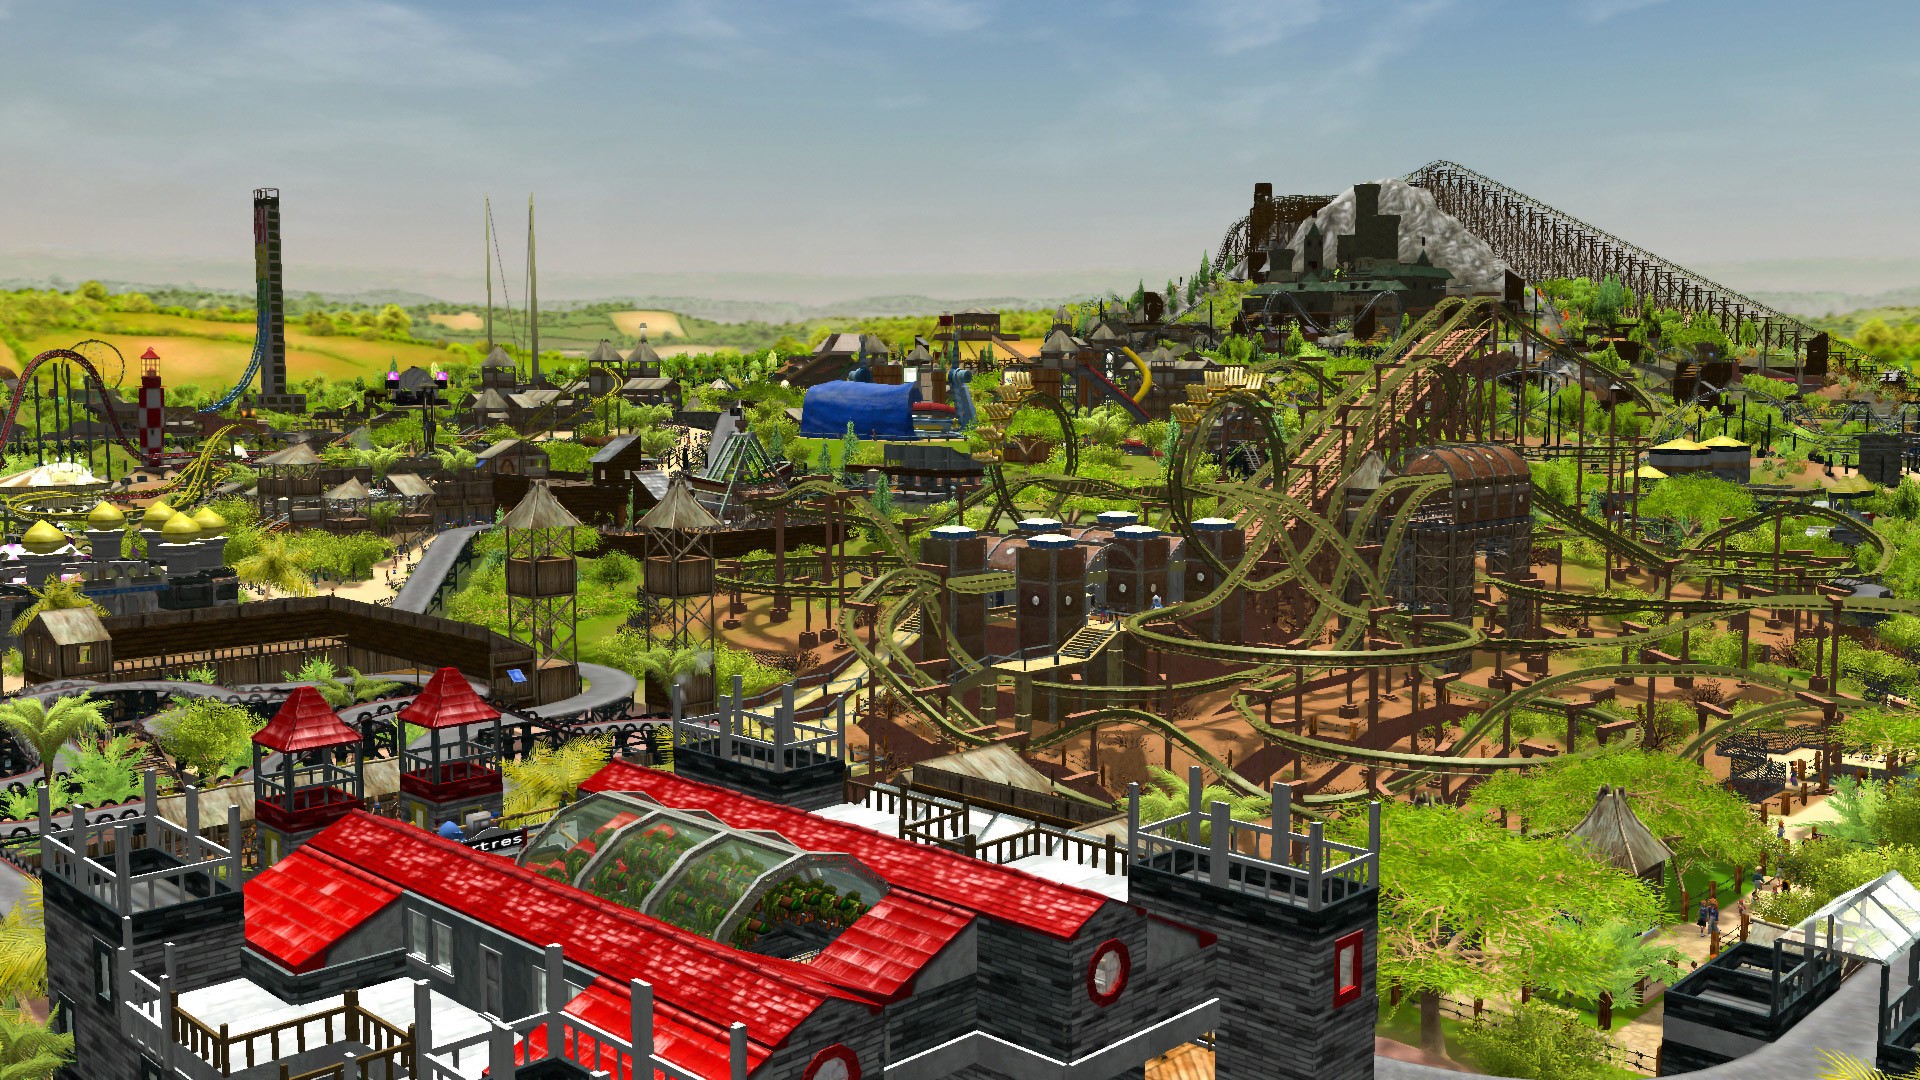 game roller coaster tycoon 3